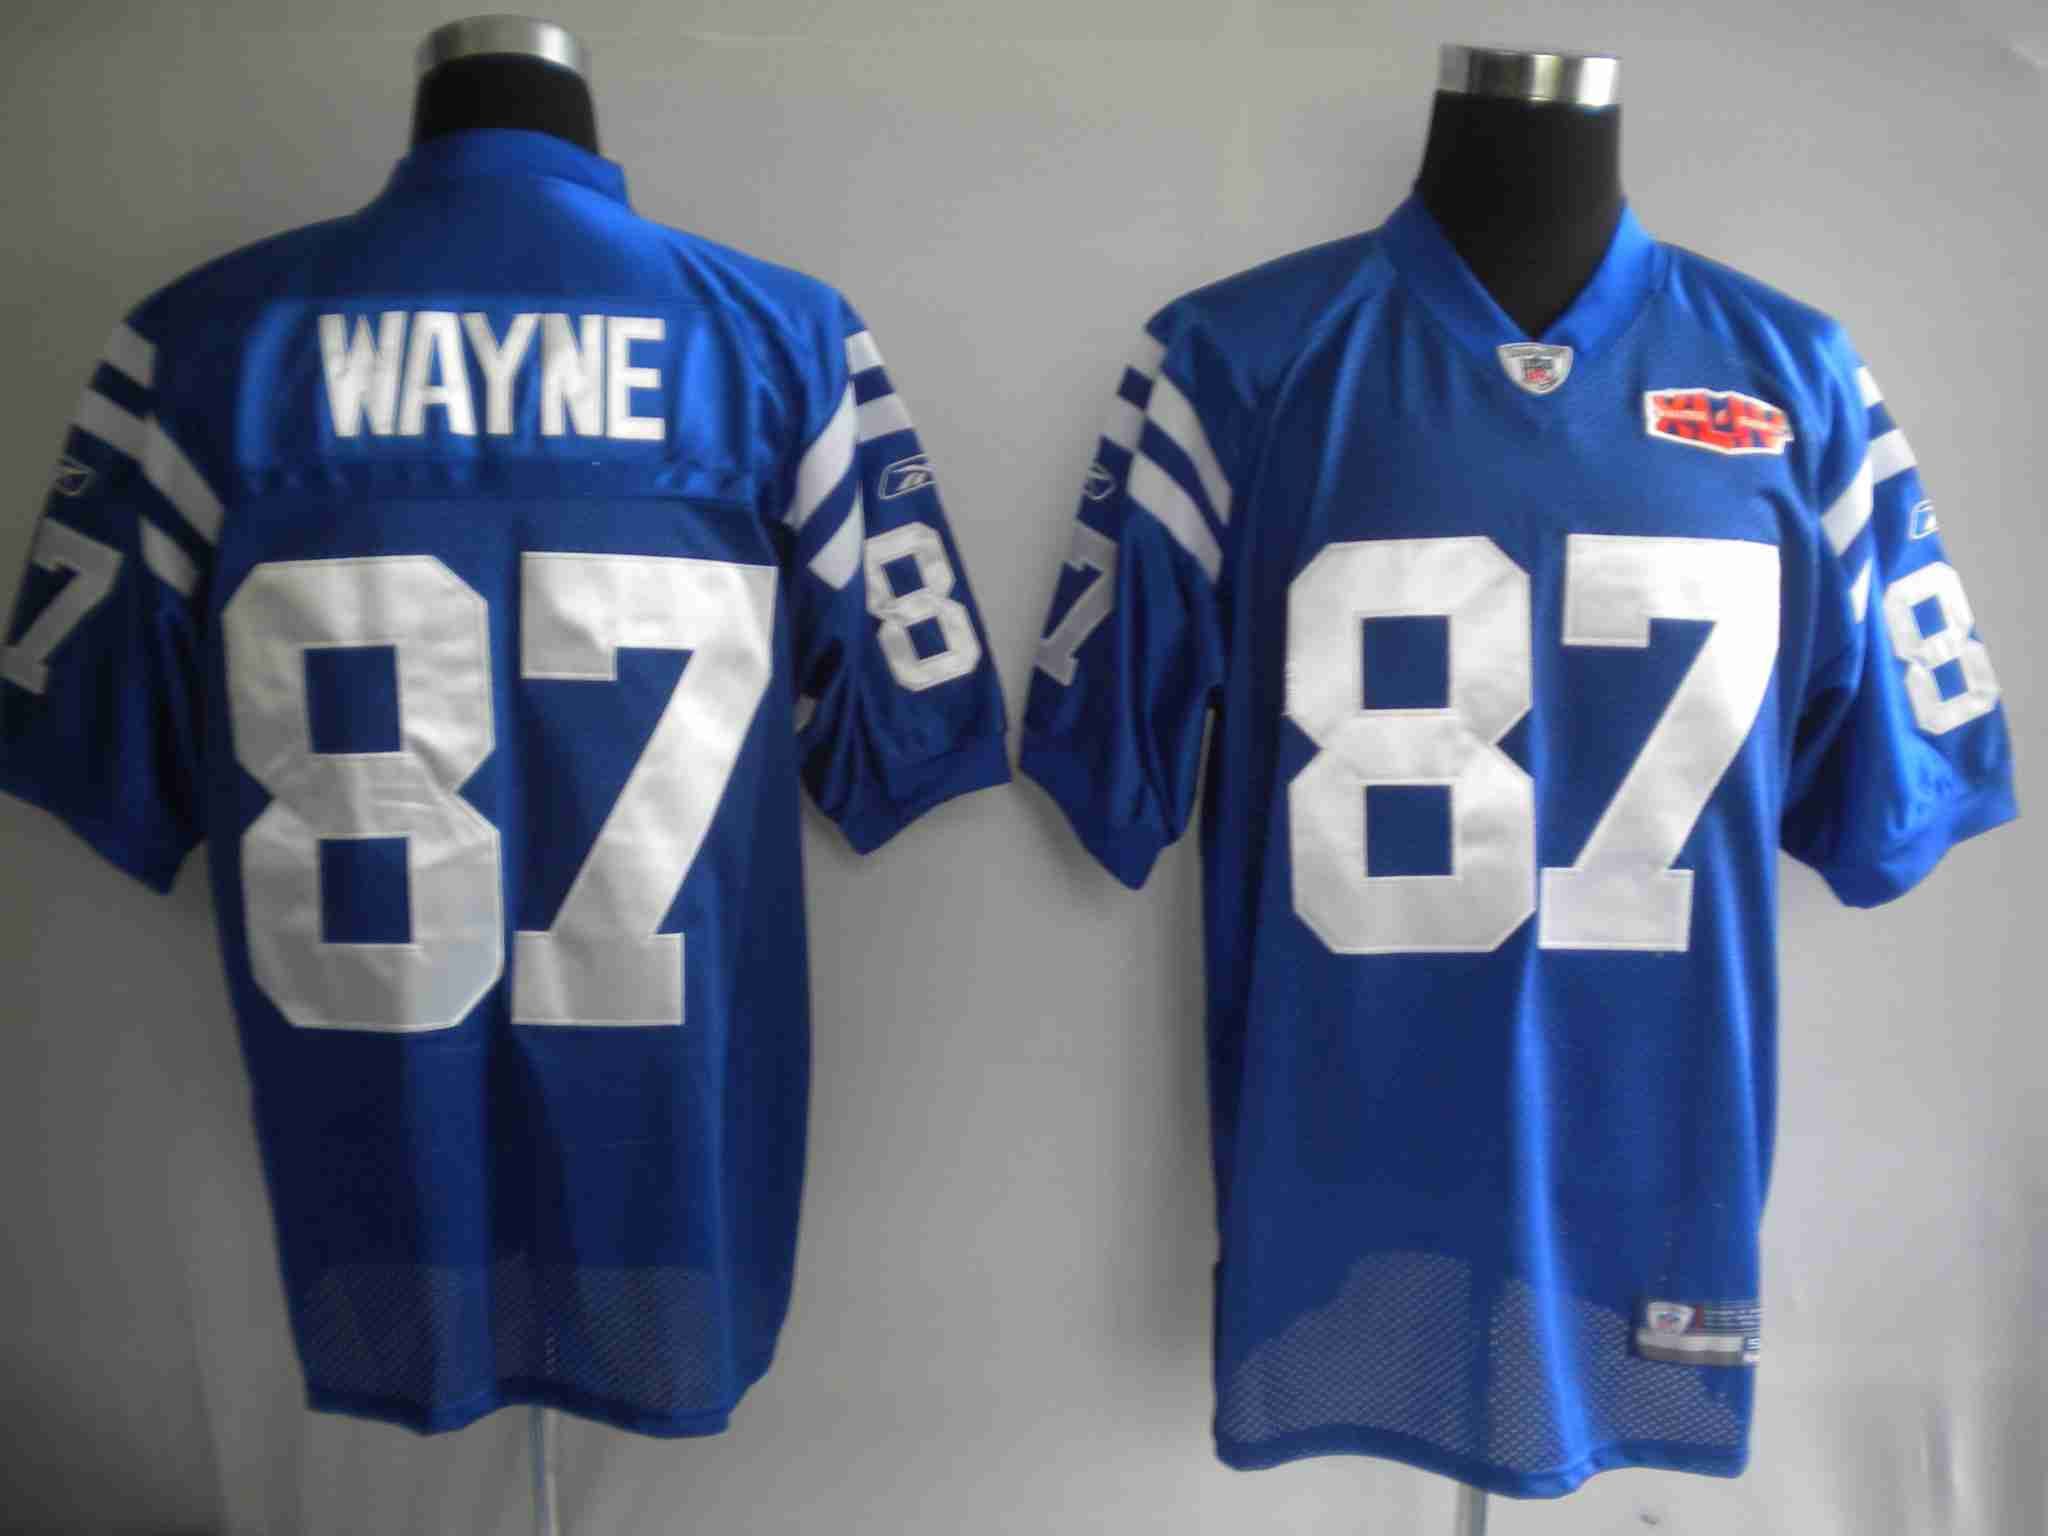 Cheap reggie wayne jersey indianapolis colts 87 wr red blue 468 0